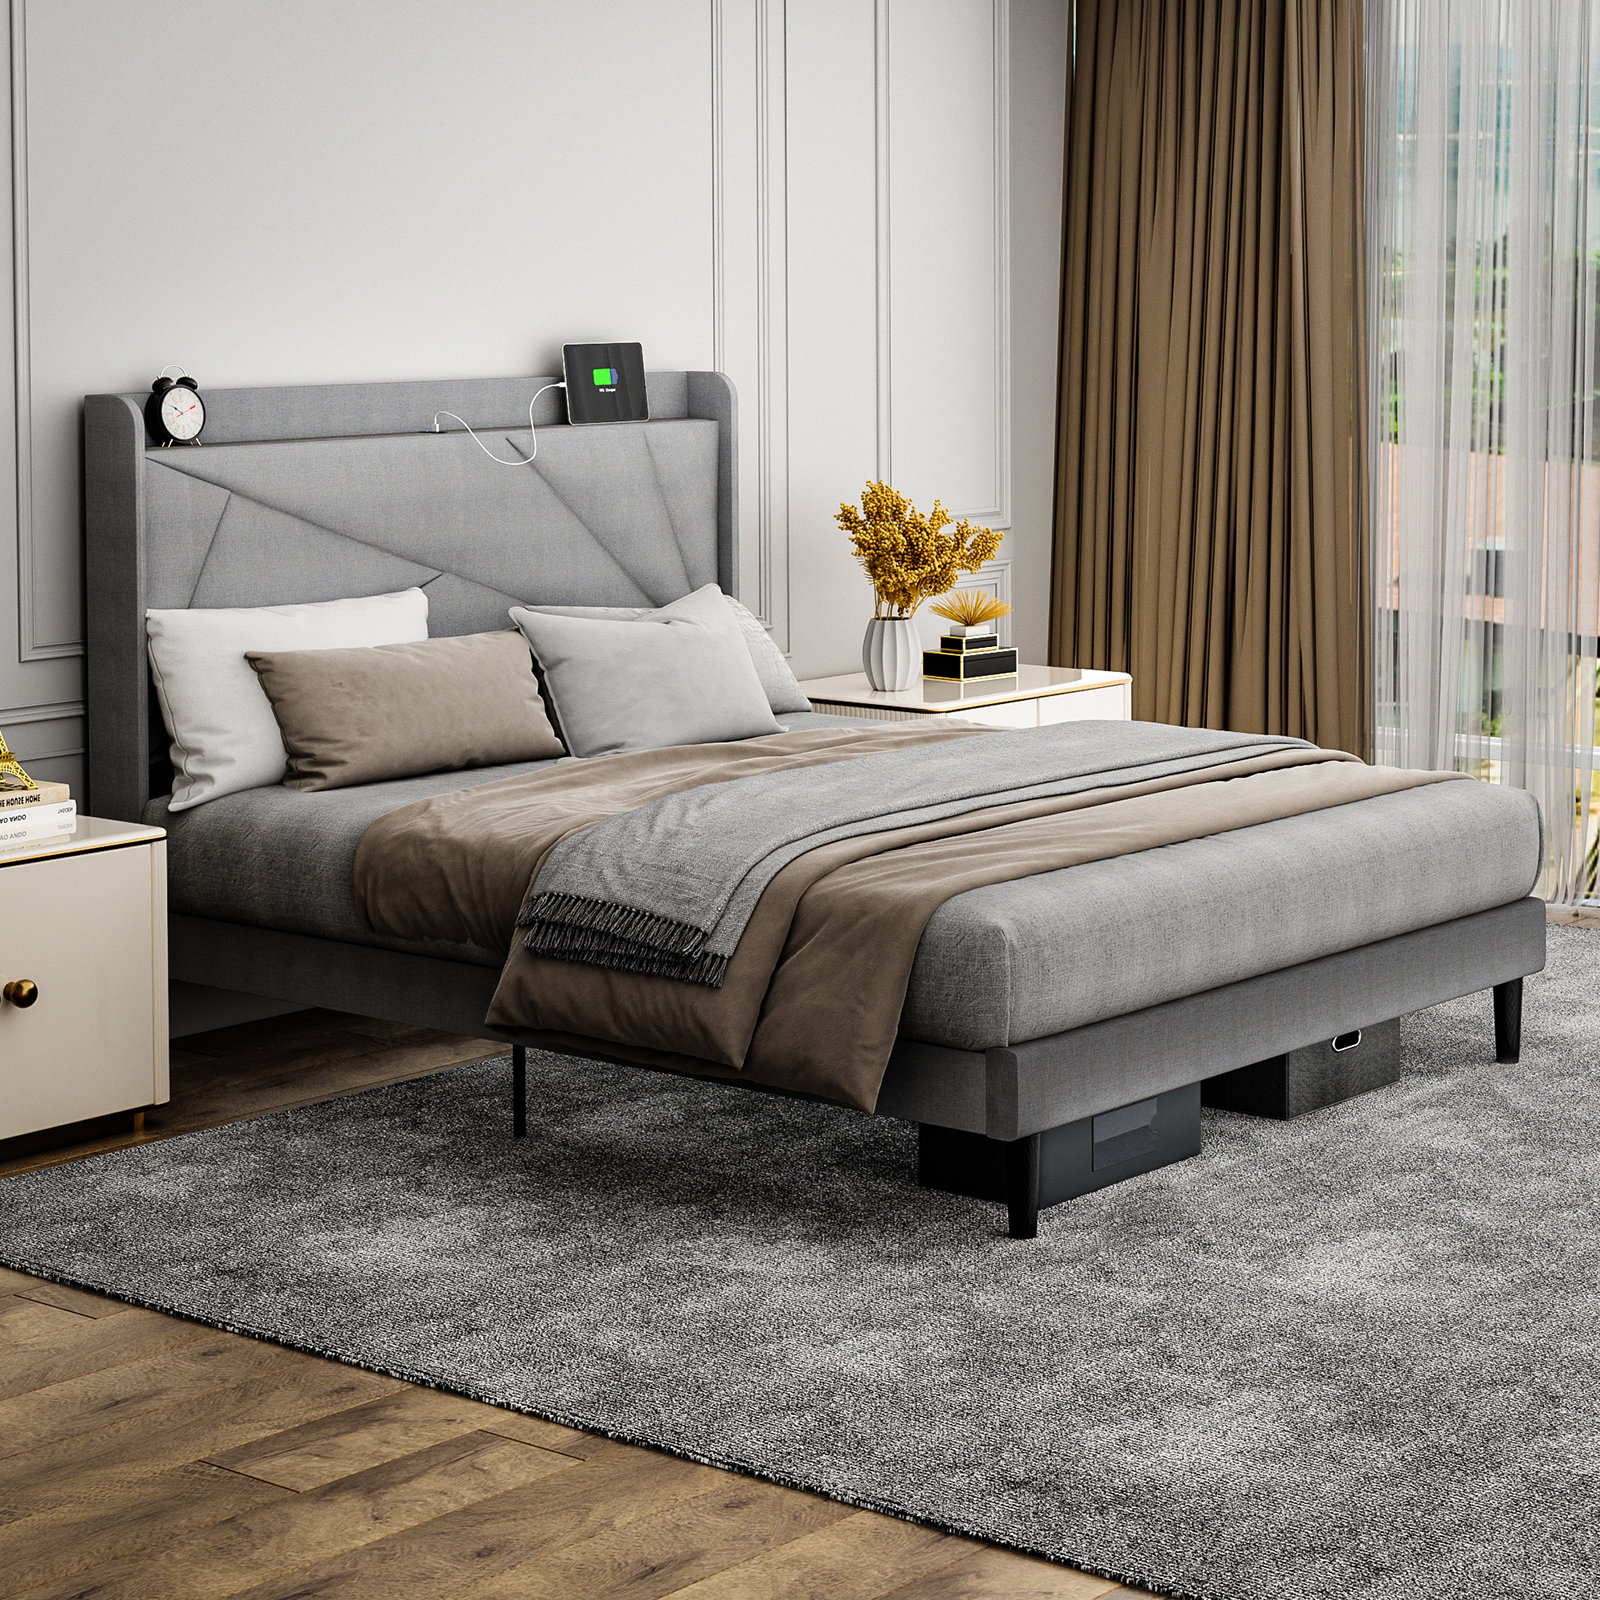 Fiona Luxe Bed With Wood Panel – The Well Appointed House